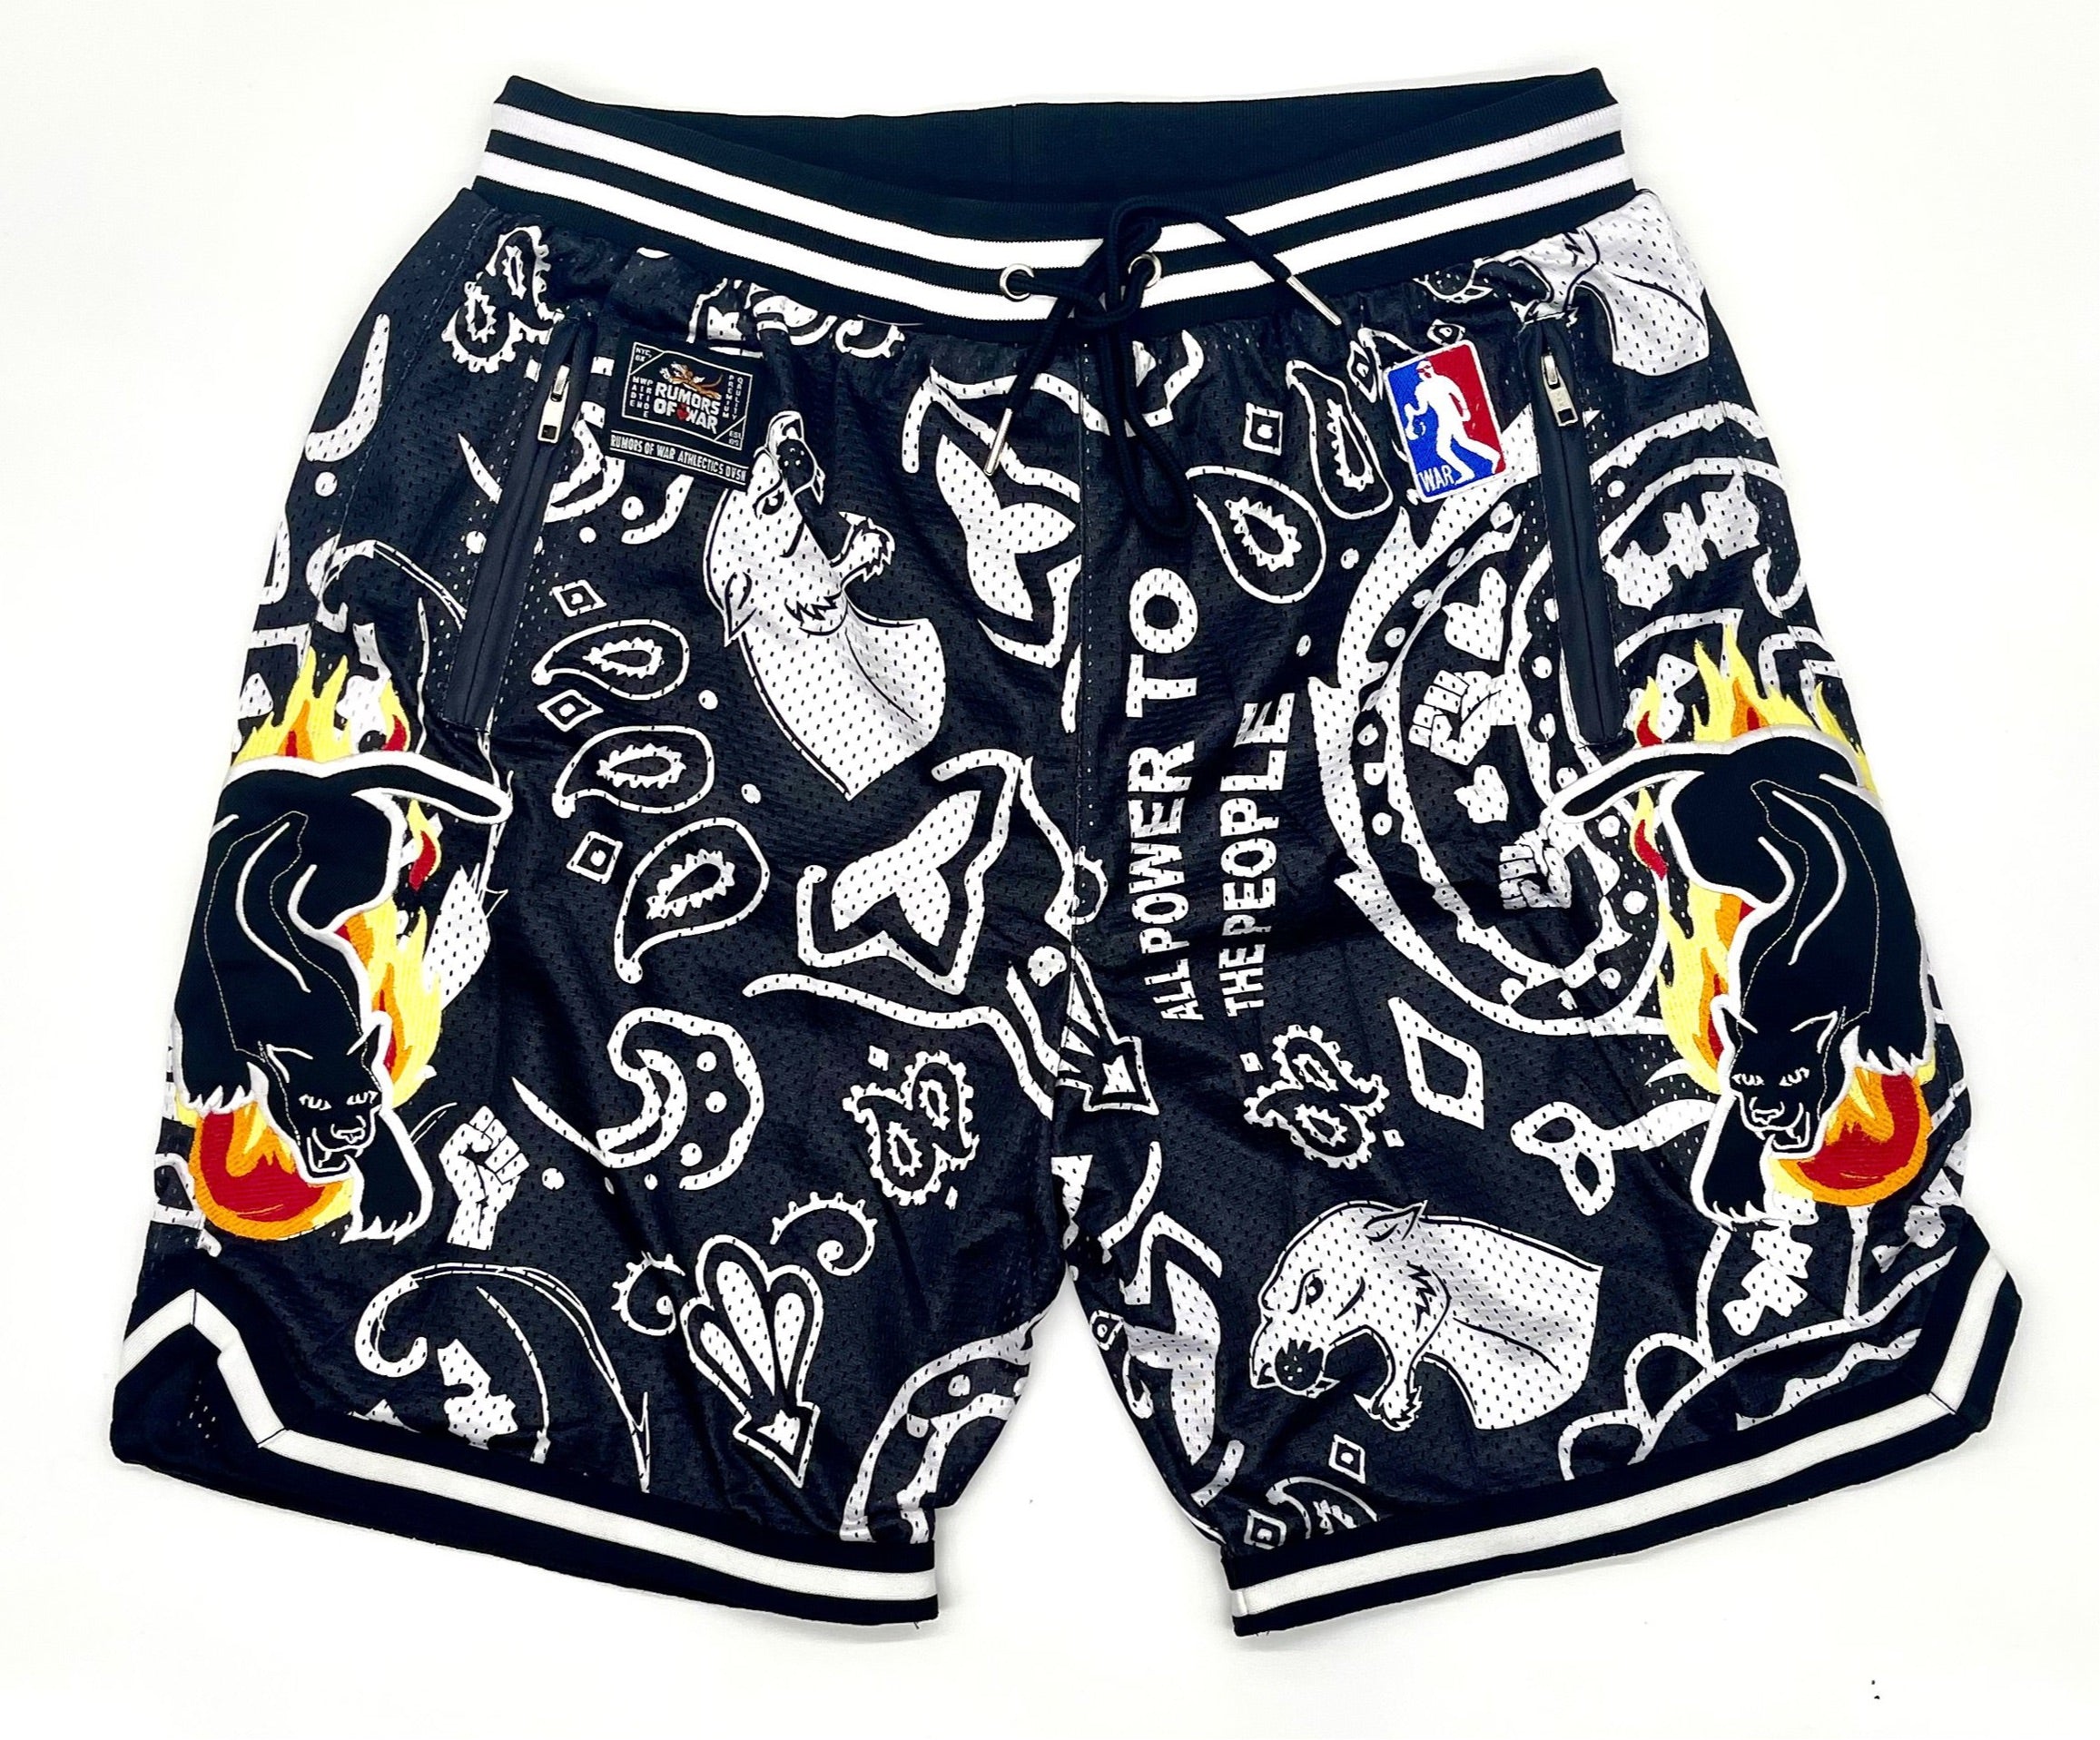 The world is yours Basket Ball Shorts – RUMORS OF WAR